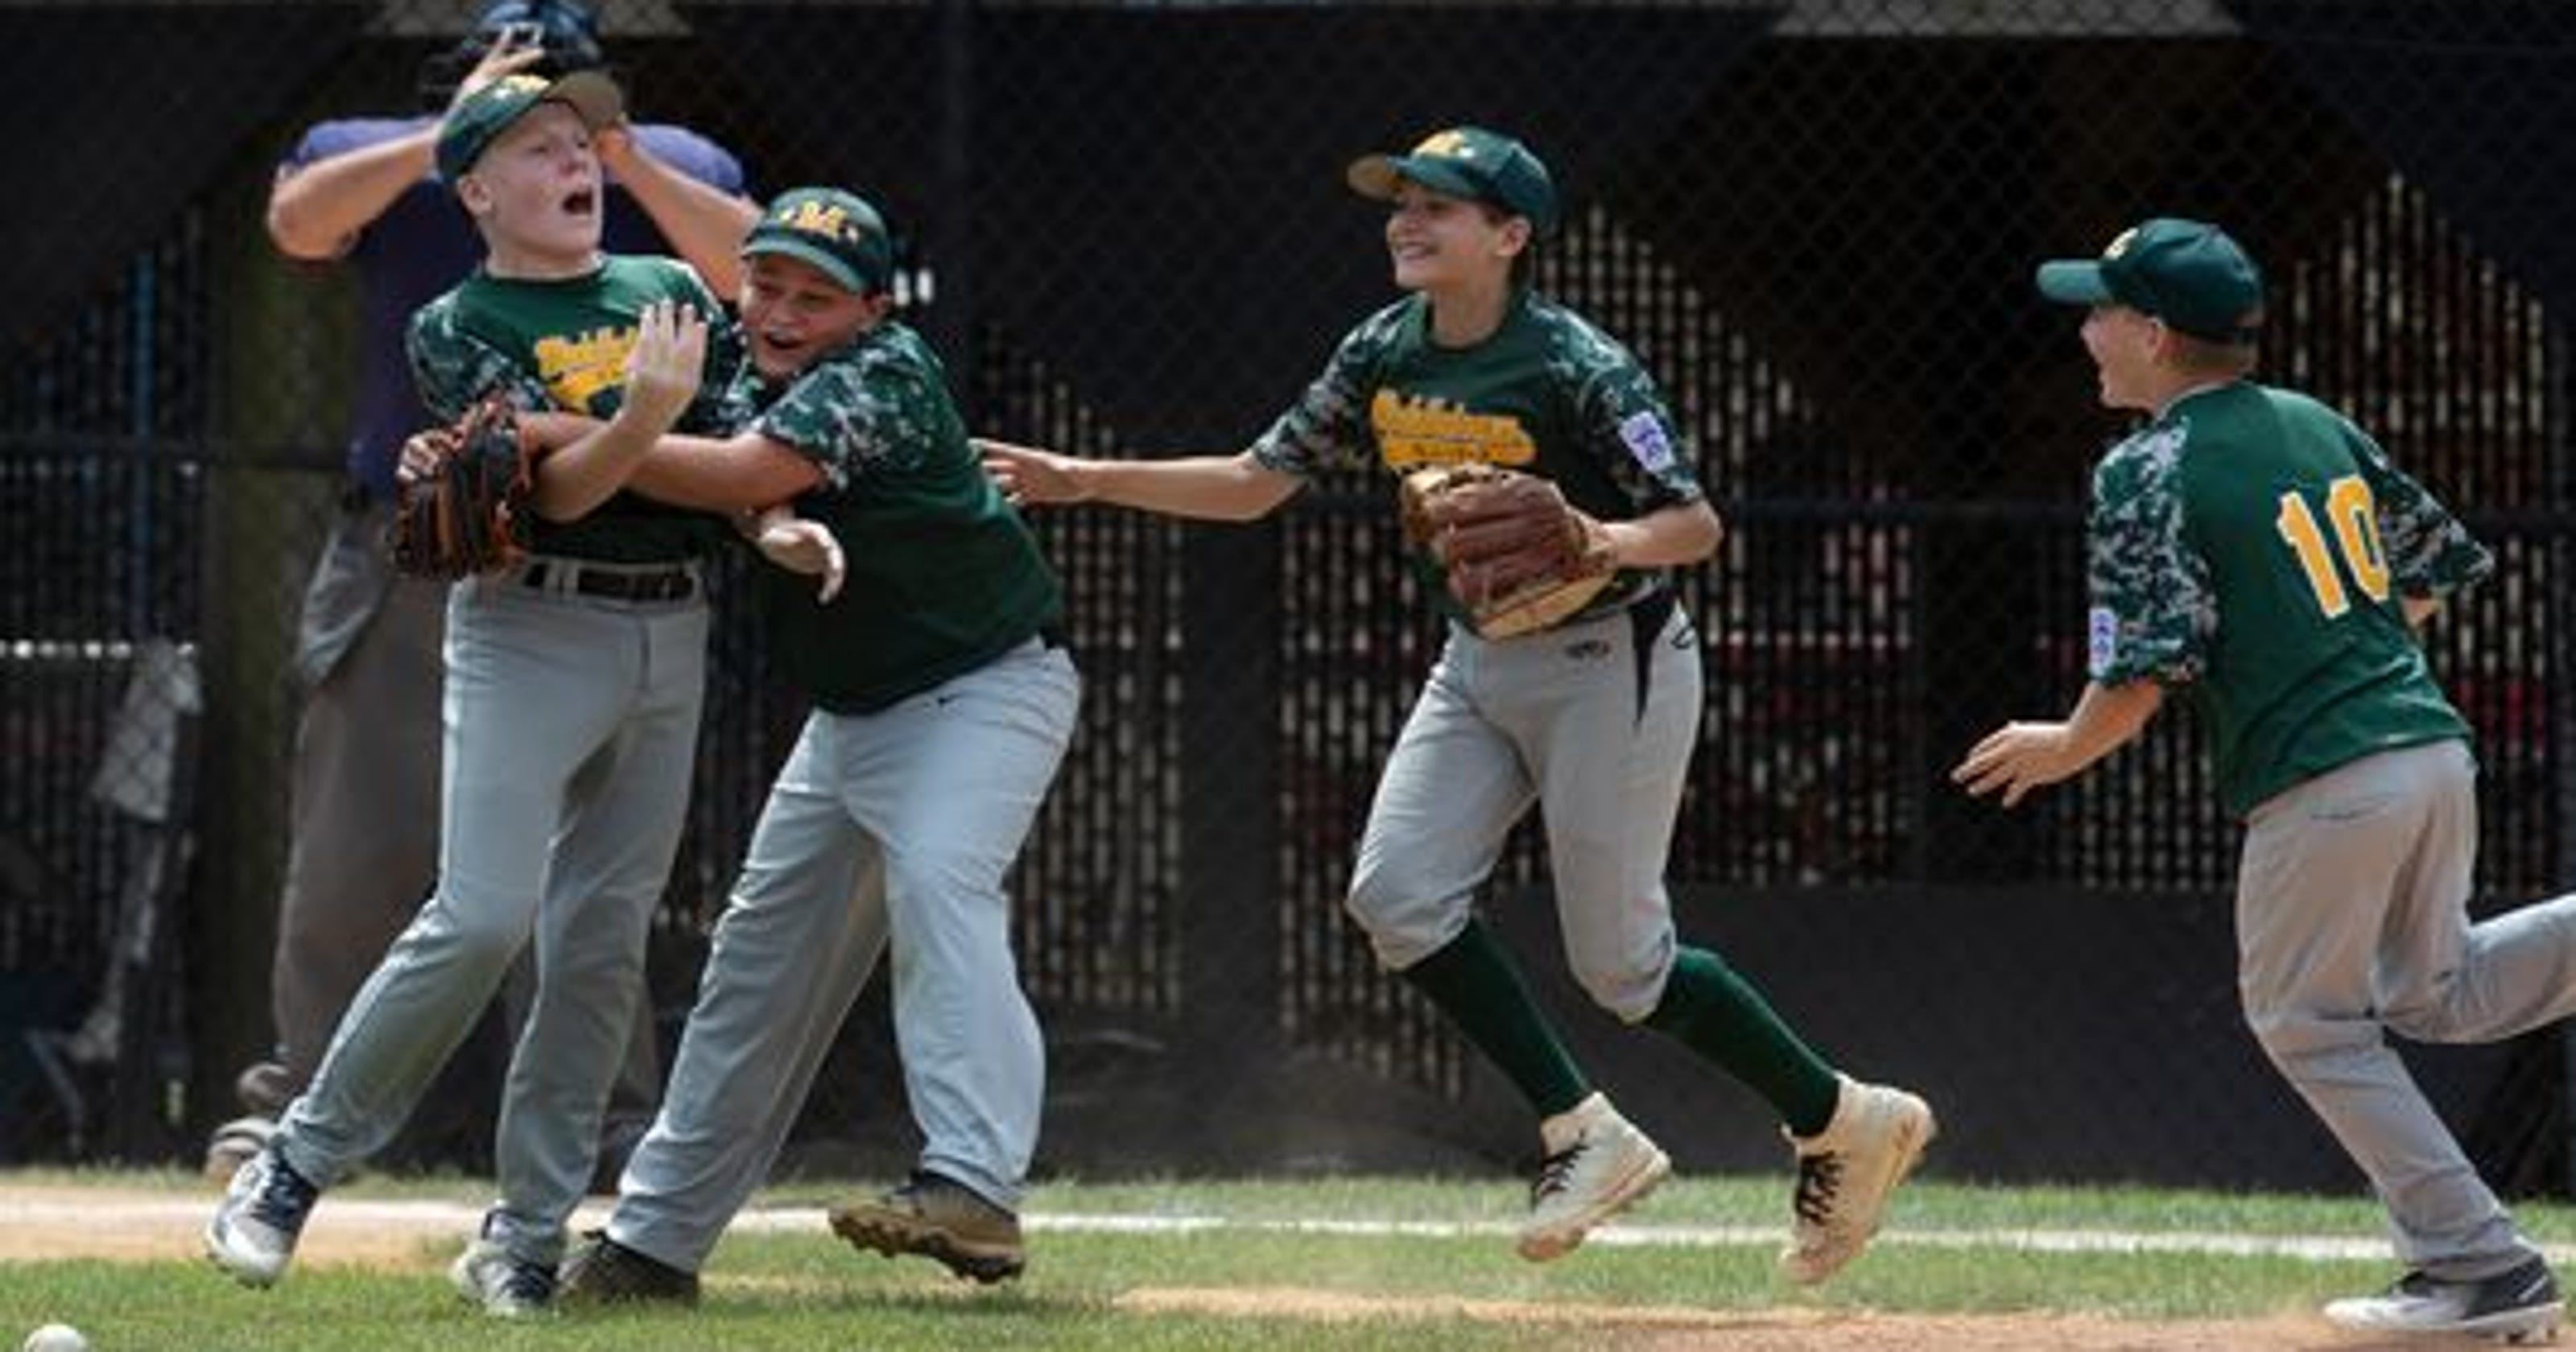 2018 New Jersey Little League State Tournament Schedule